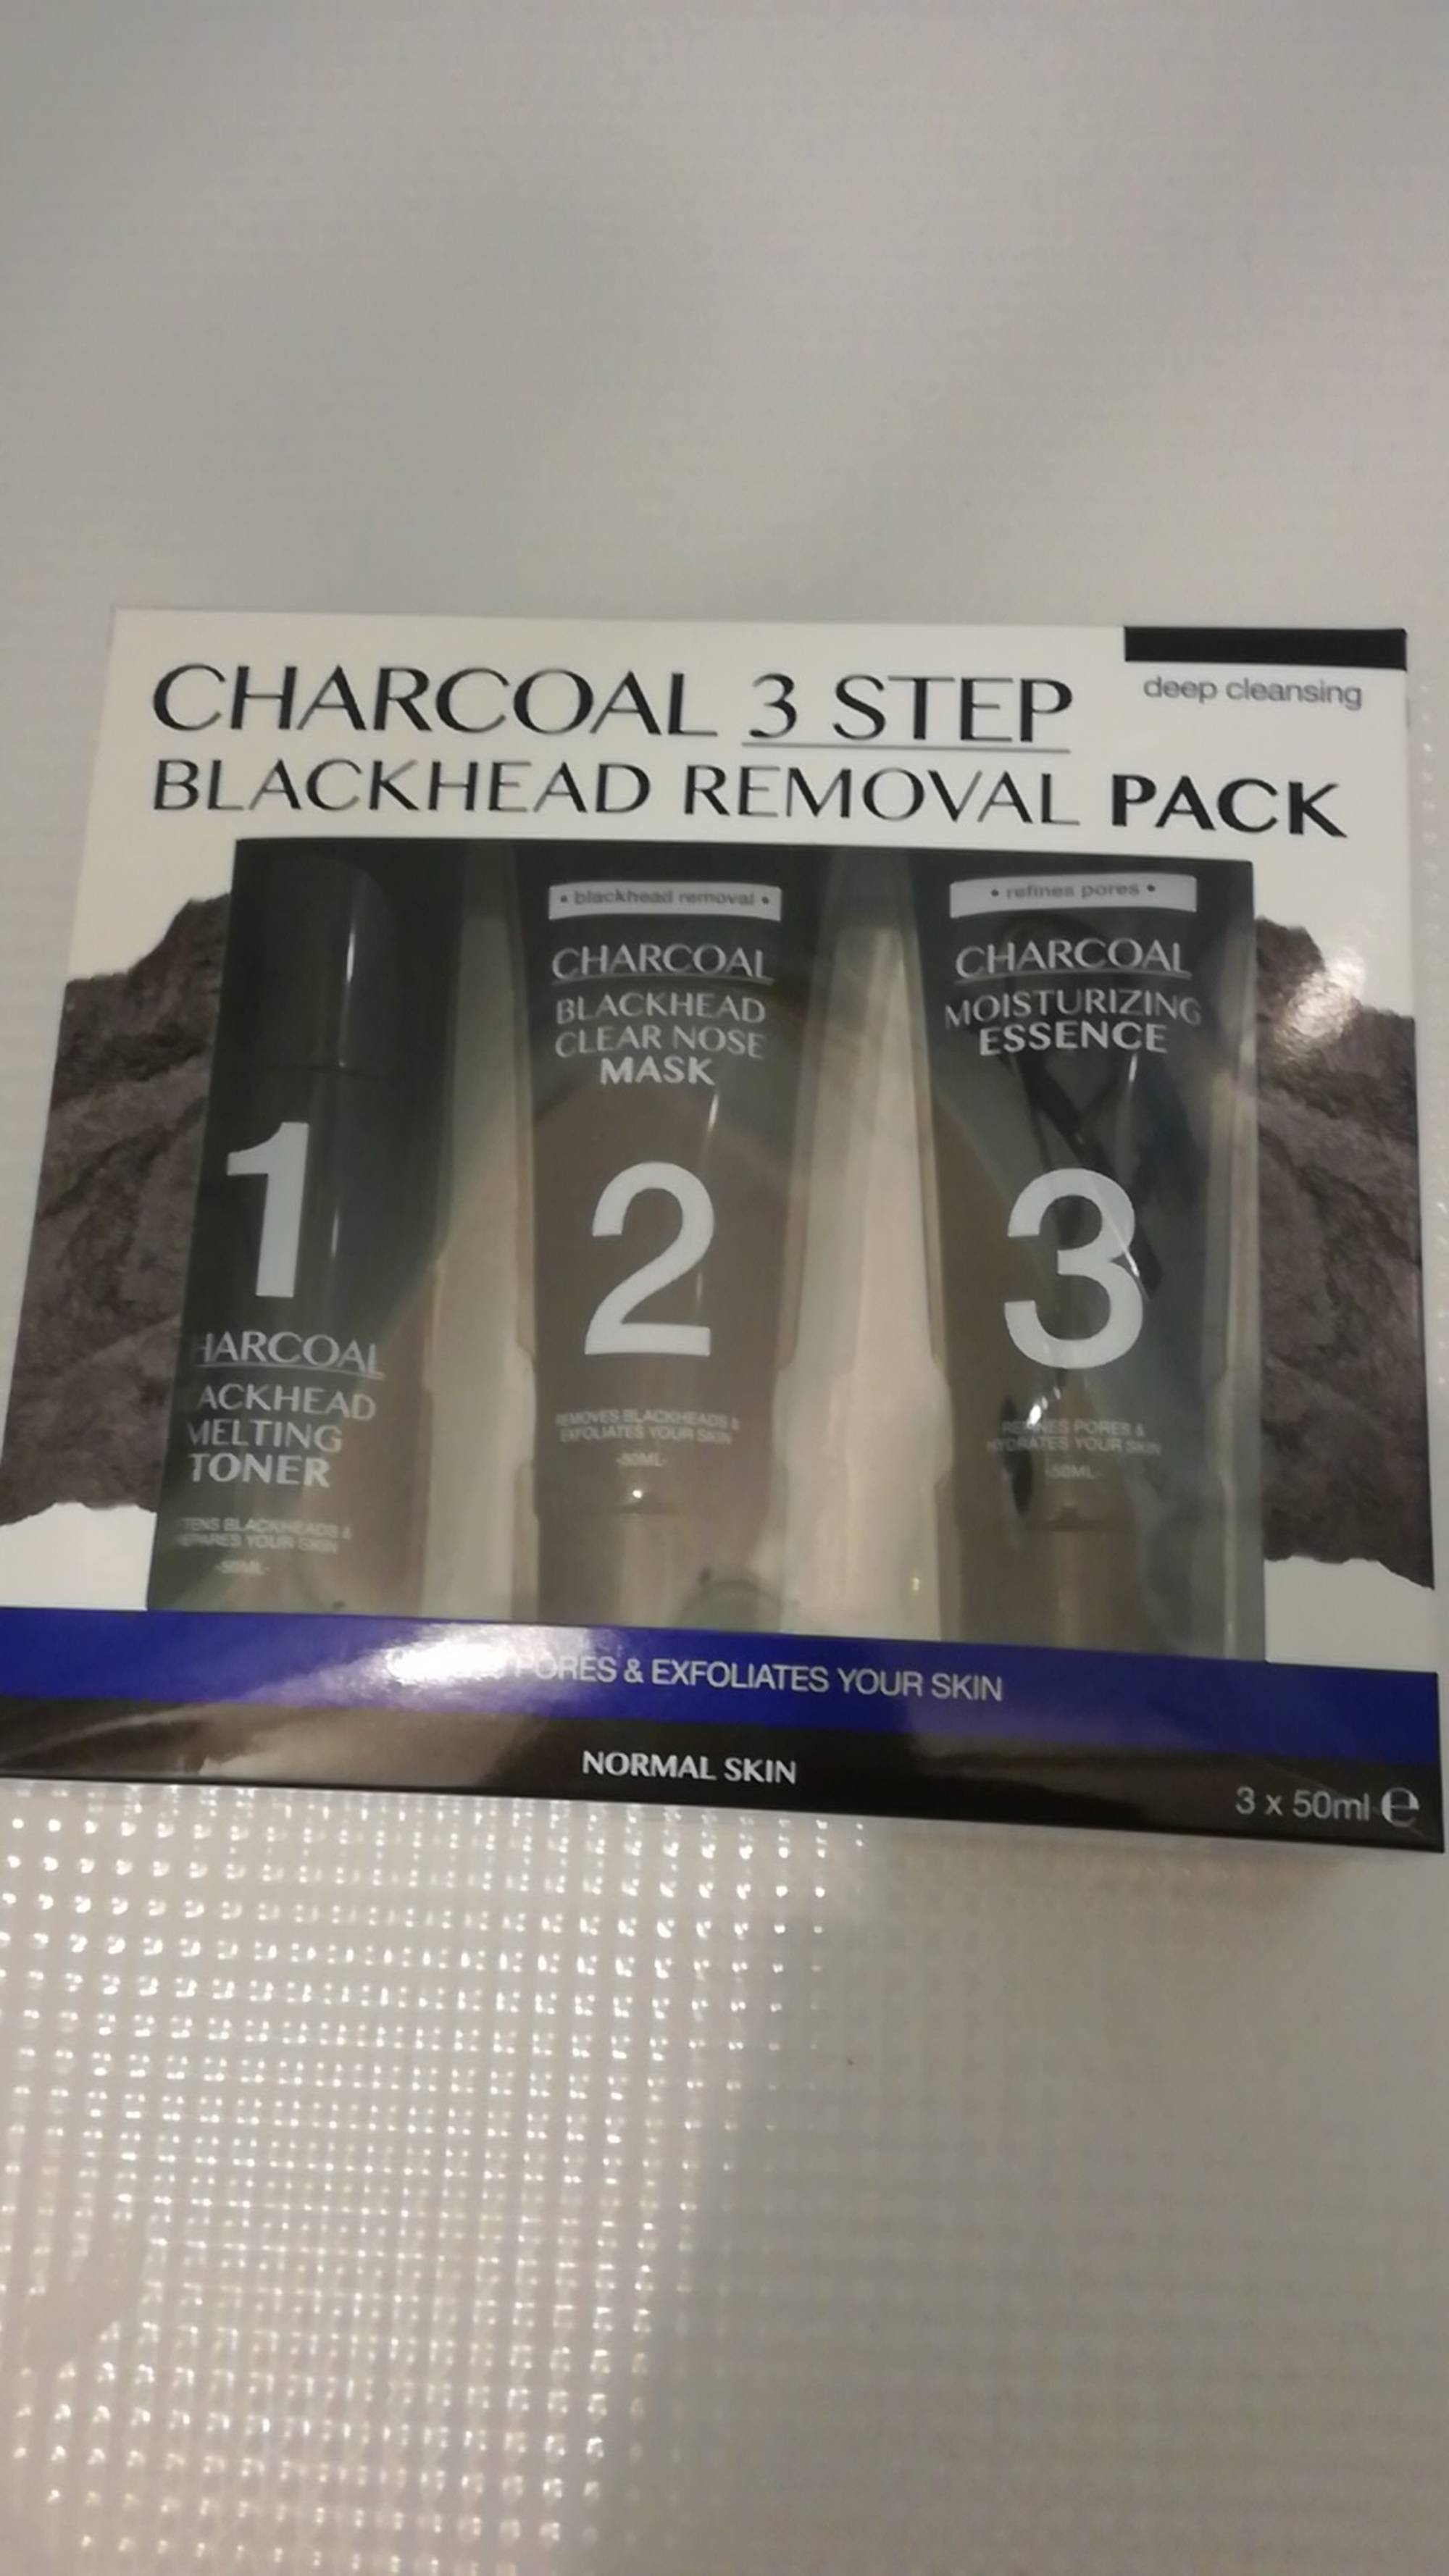 CHARCOAL - Charcoal 3 step - Blackhead removal pack